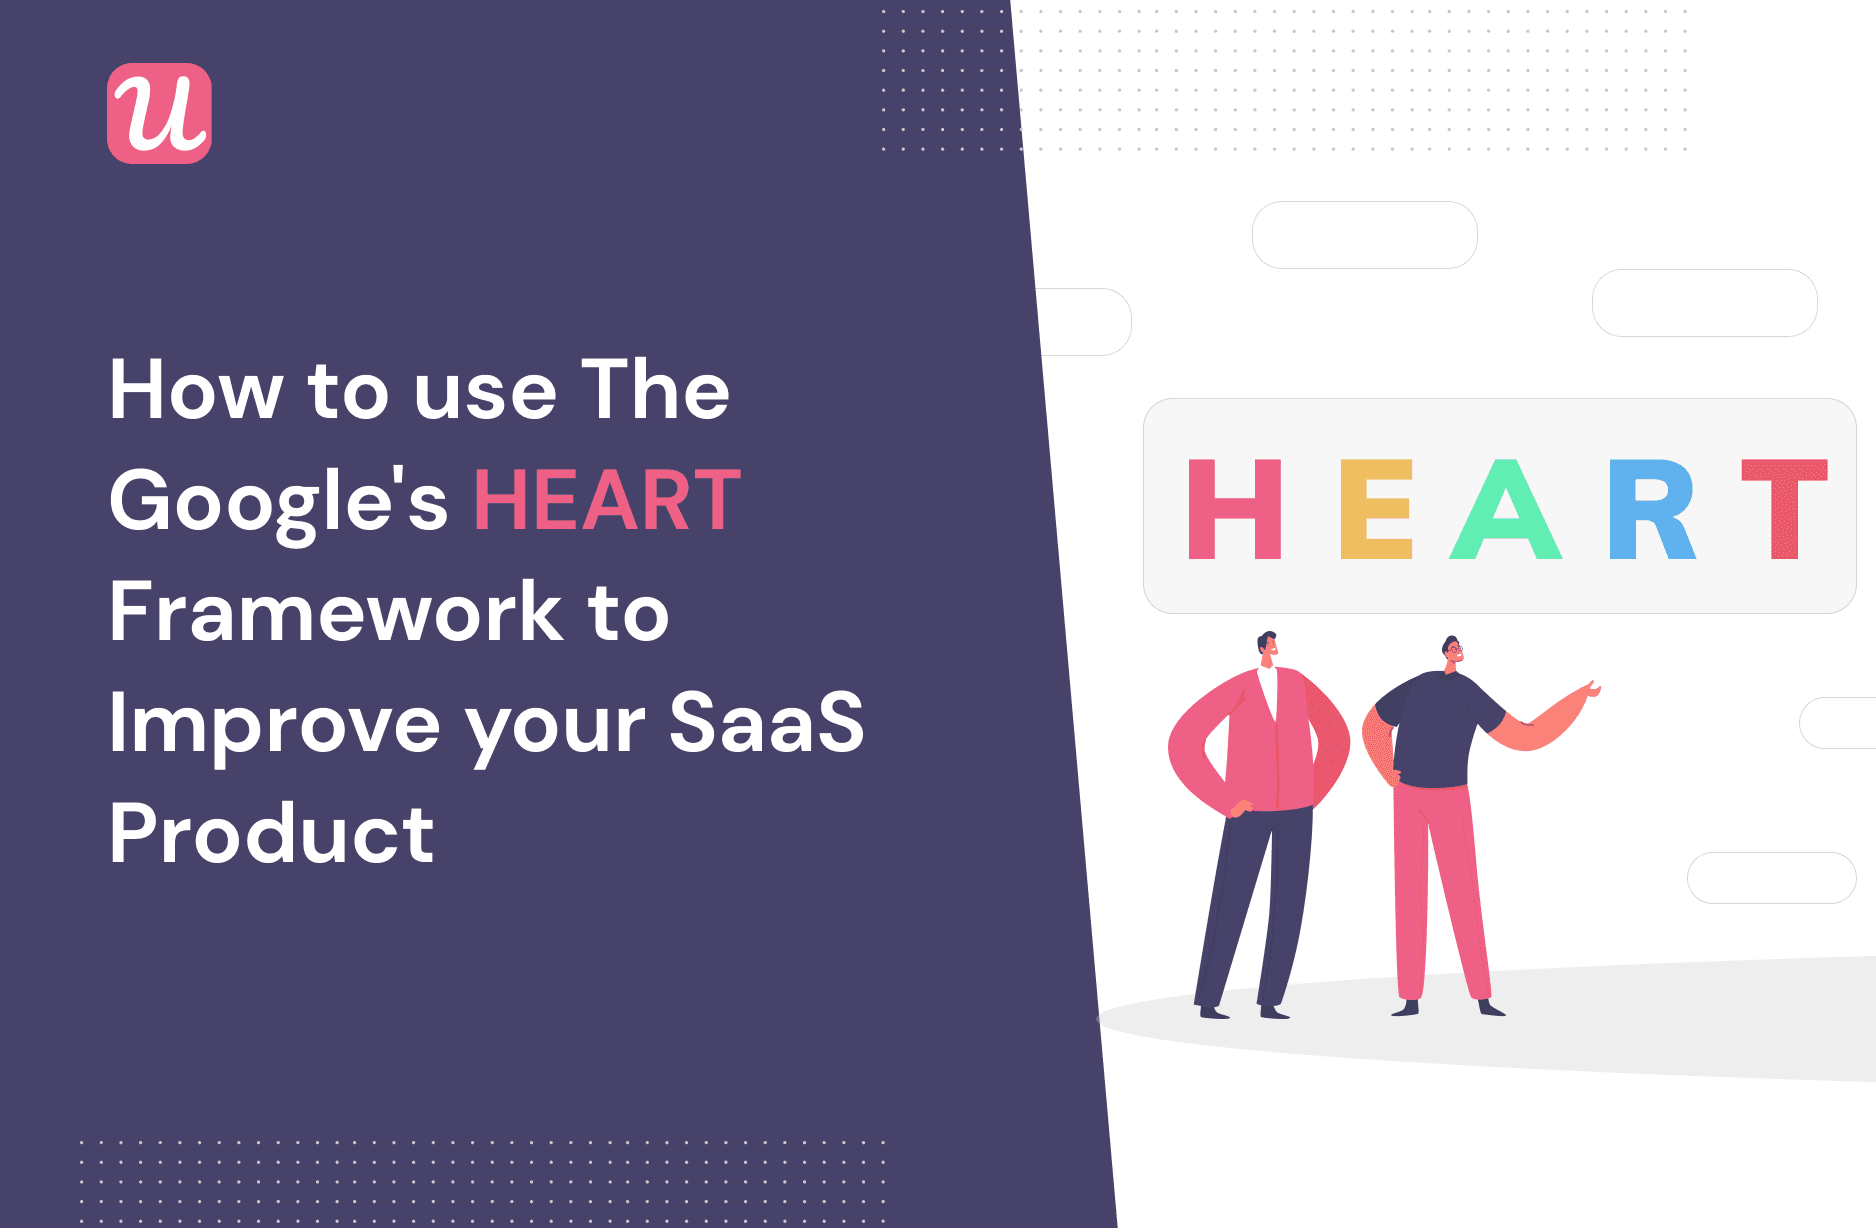 How to Use Google's HEART Framework to Improve Your SaaS Product